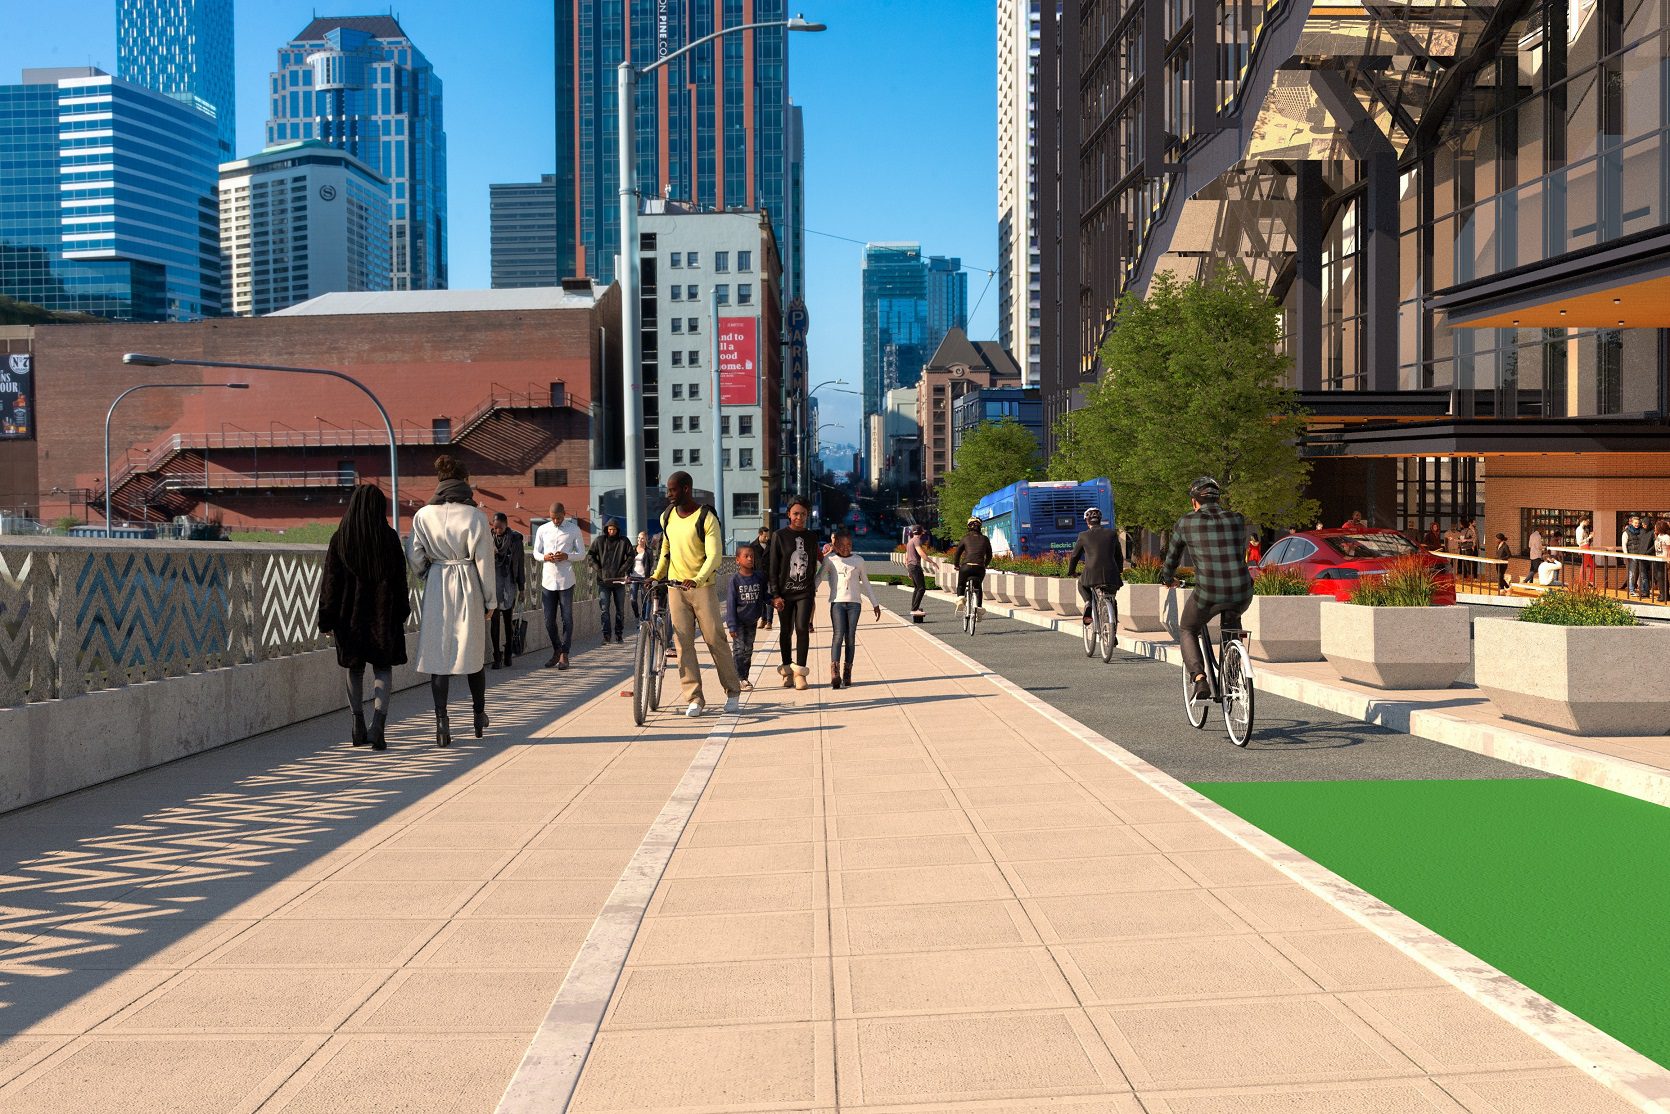 Rendering and visualization of people walking along the sidewalk and biking in a bike lane on a sunny day. Large buildings are visible in the background as well as trees and planter boxes to the right.